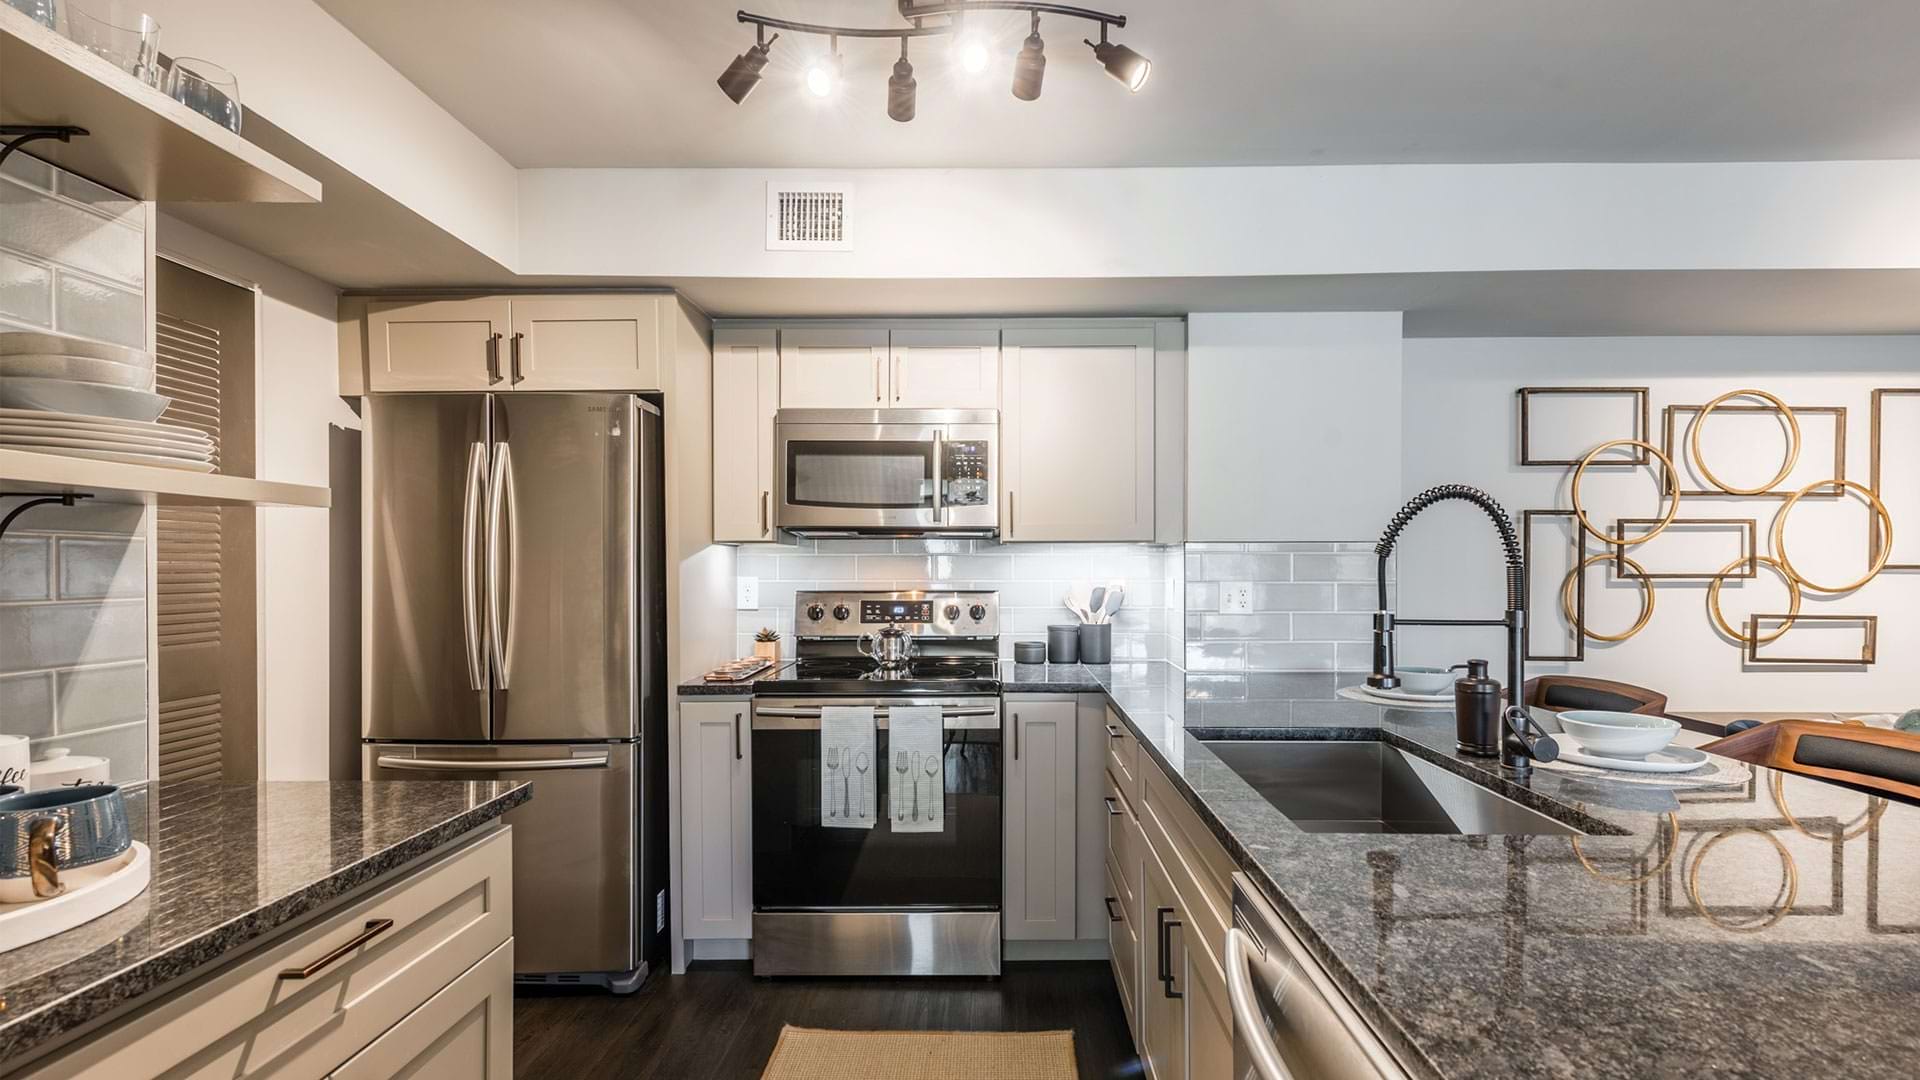 Kitchen with Stainless Steel Appliances at Our Apartments for Rent Near Boynton Beach